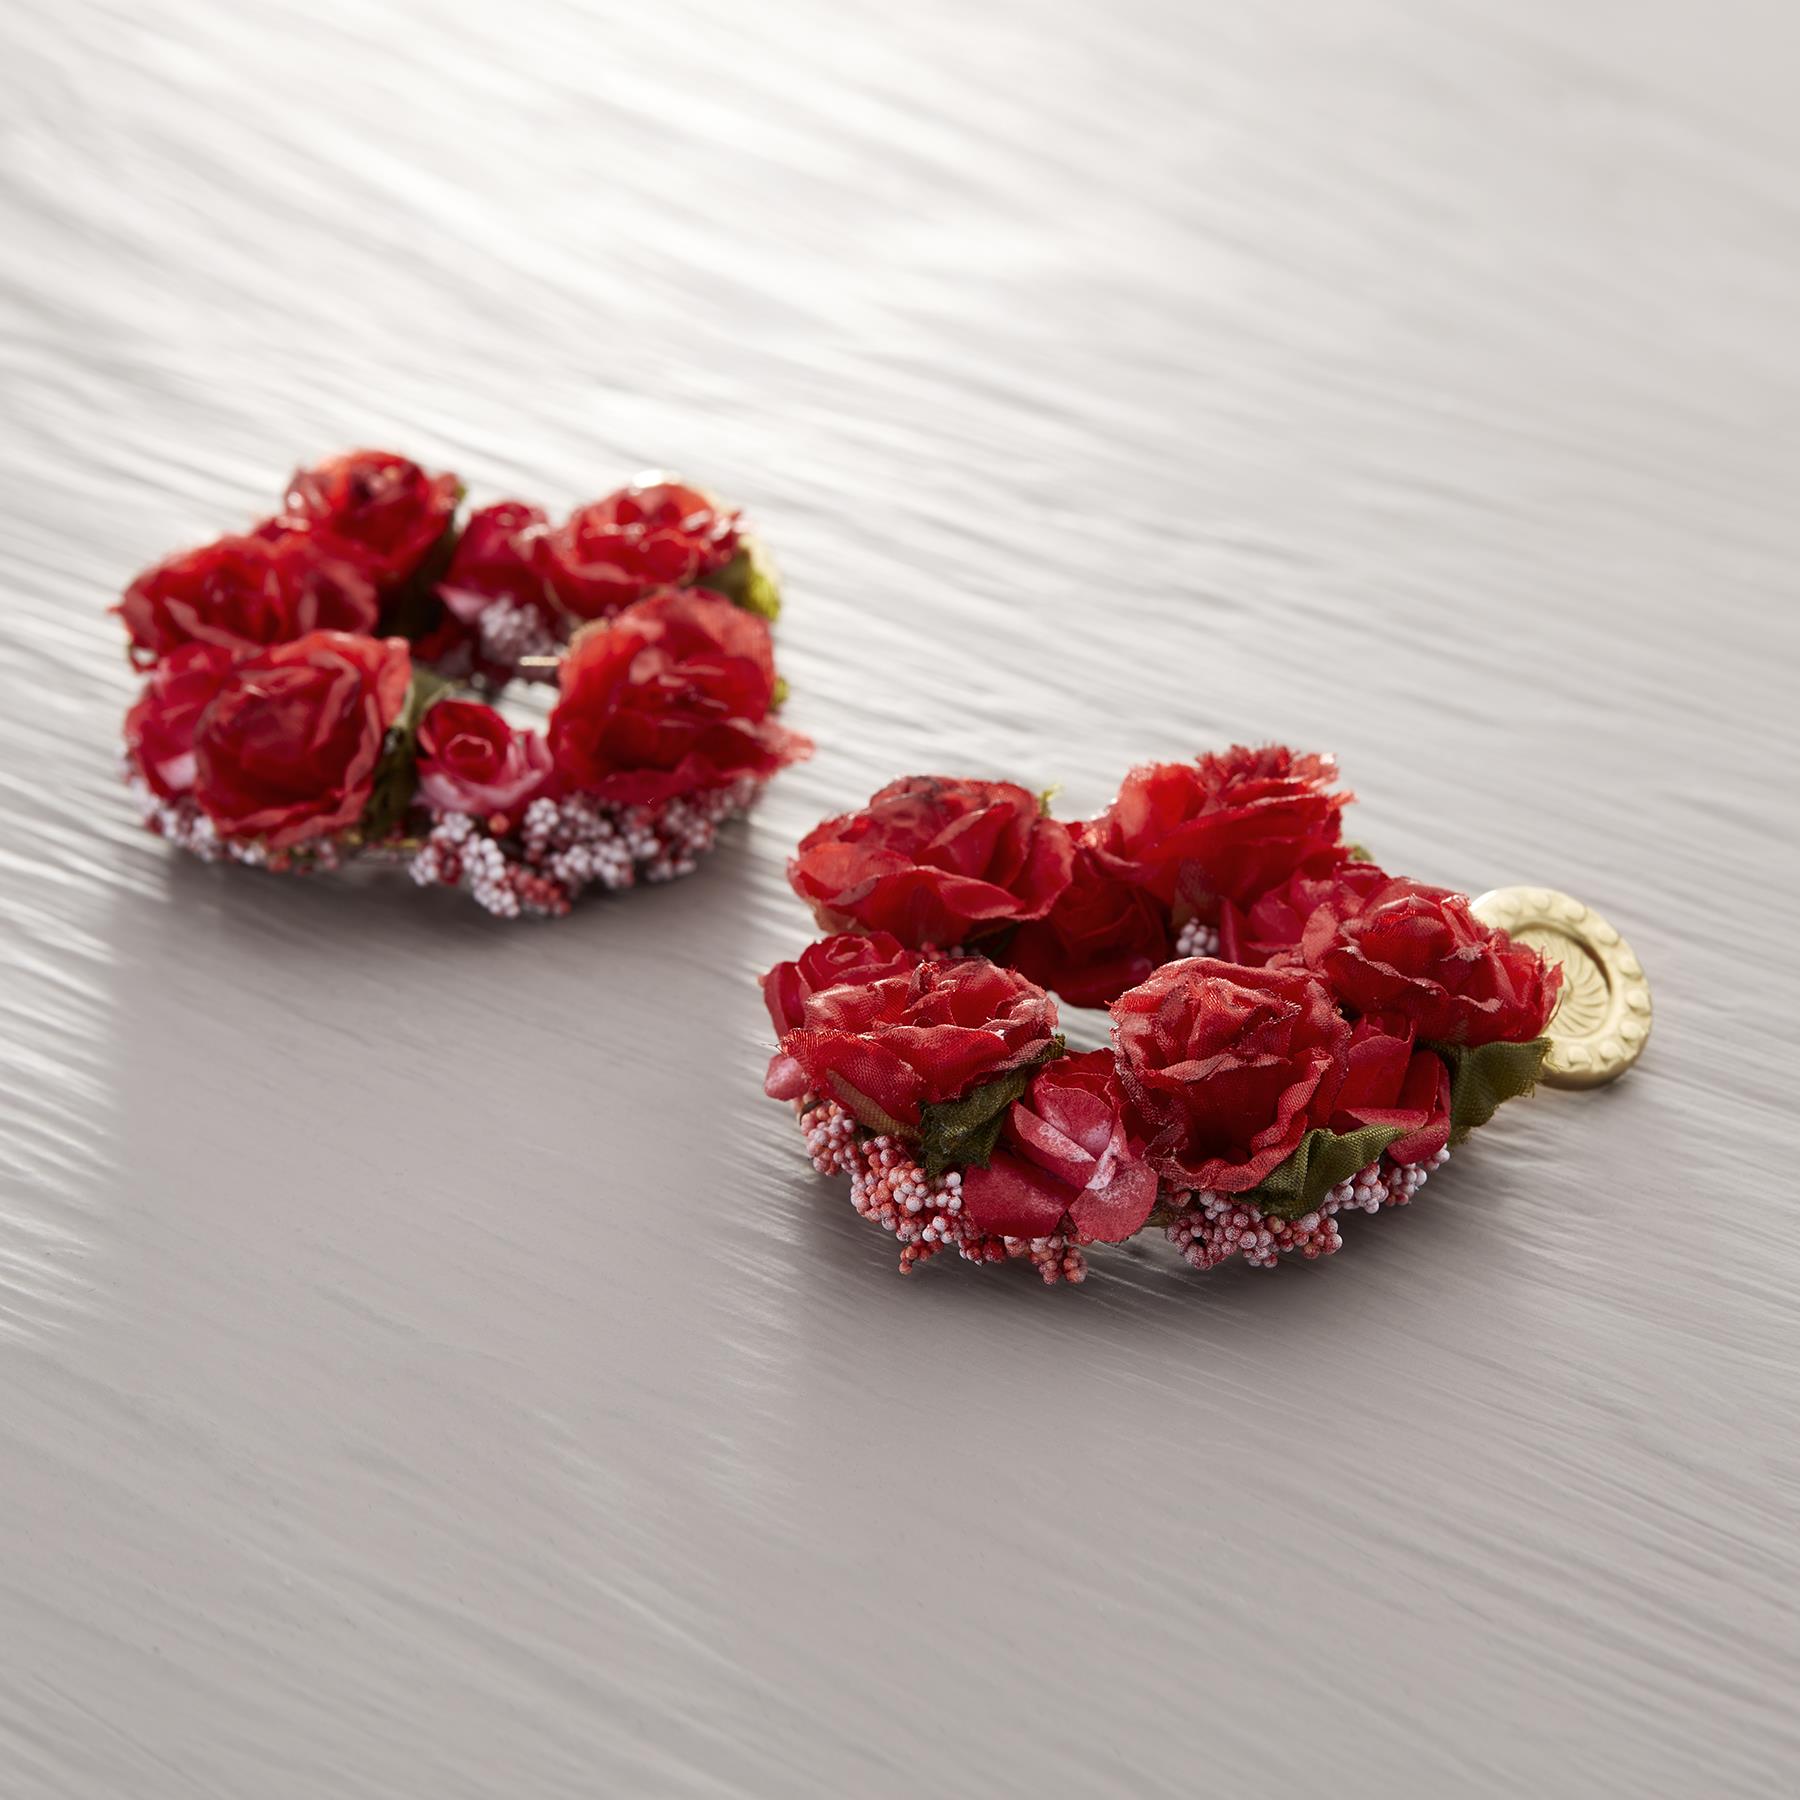 TRUE PASSION. Drop earrings with flowers